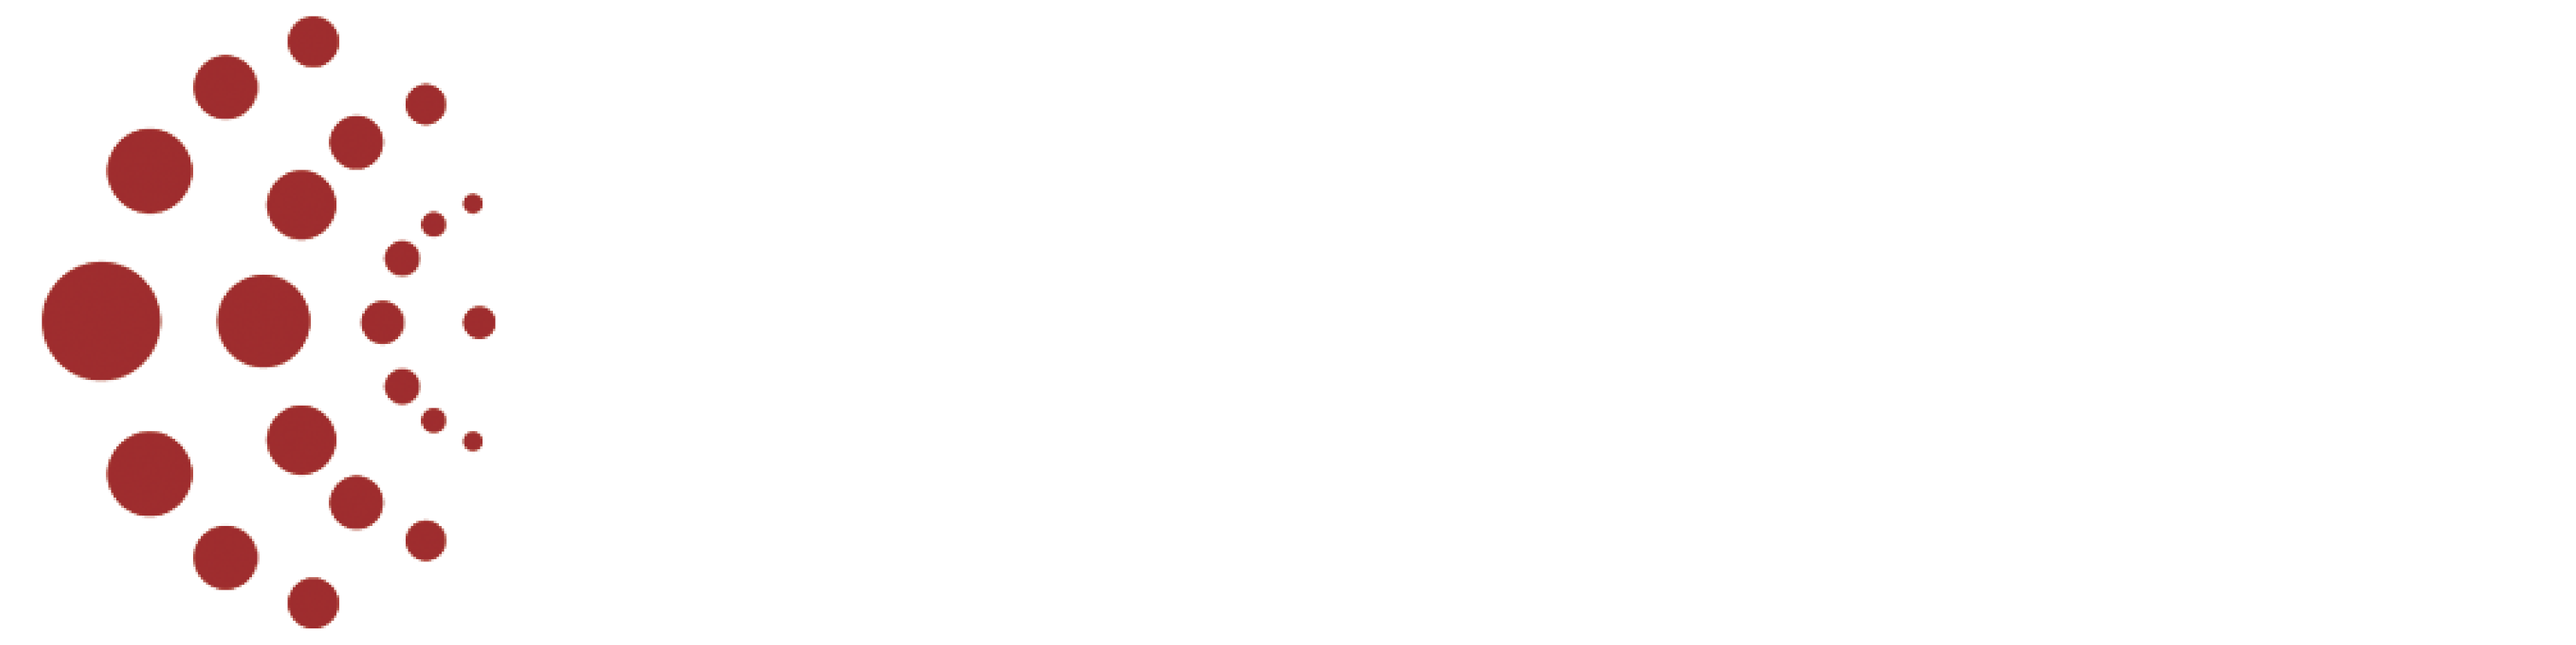 Network Doctor | IT Solutions & Services